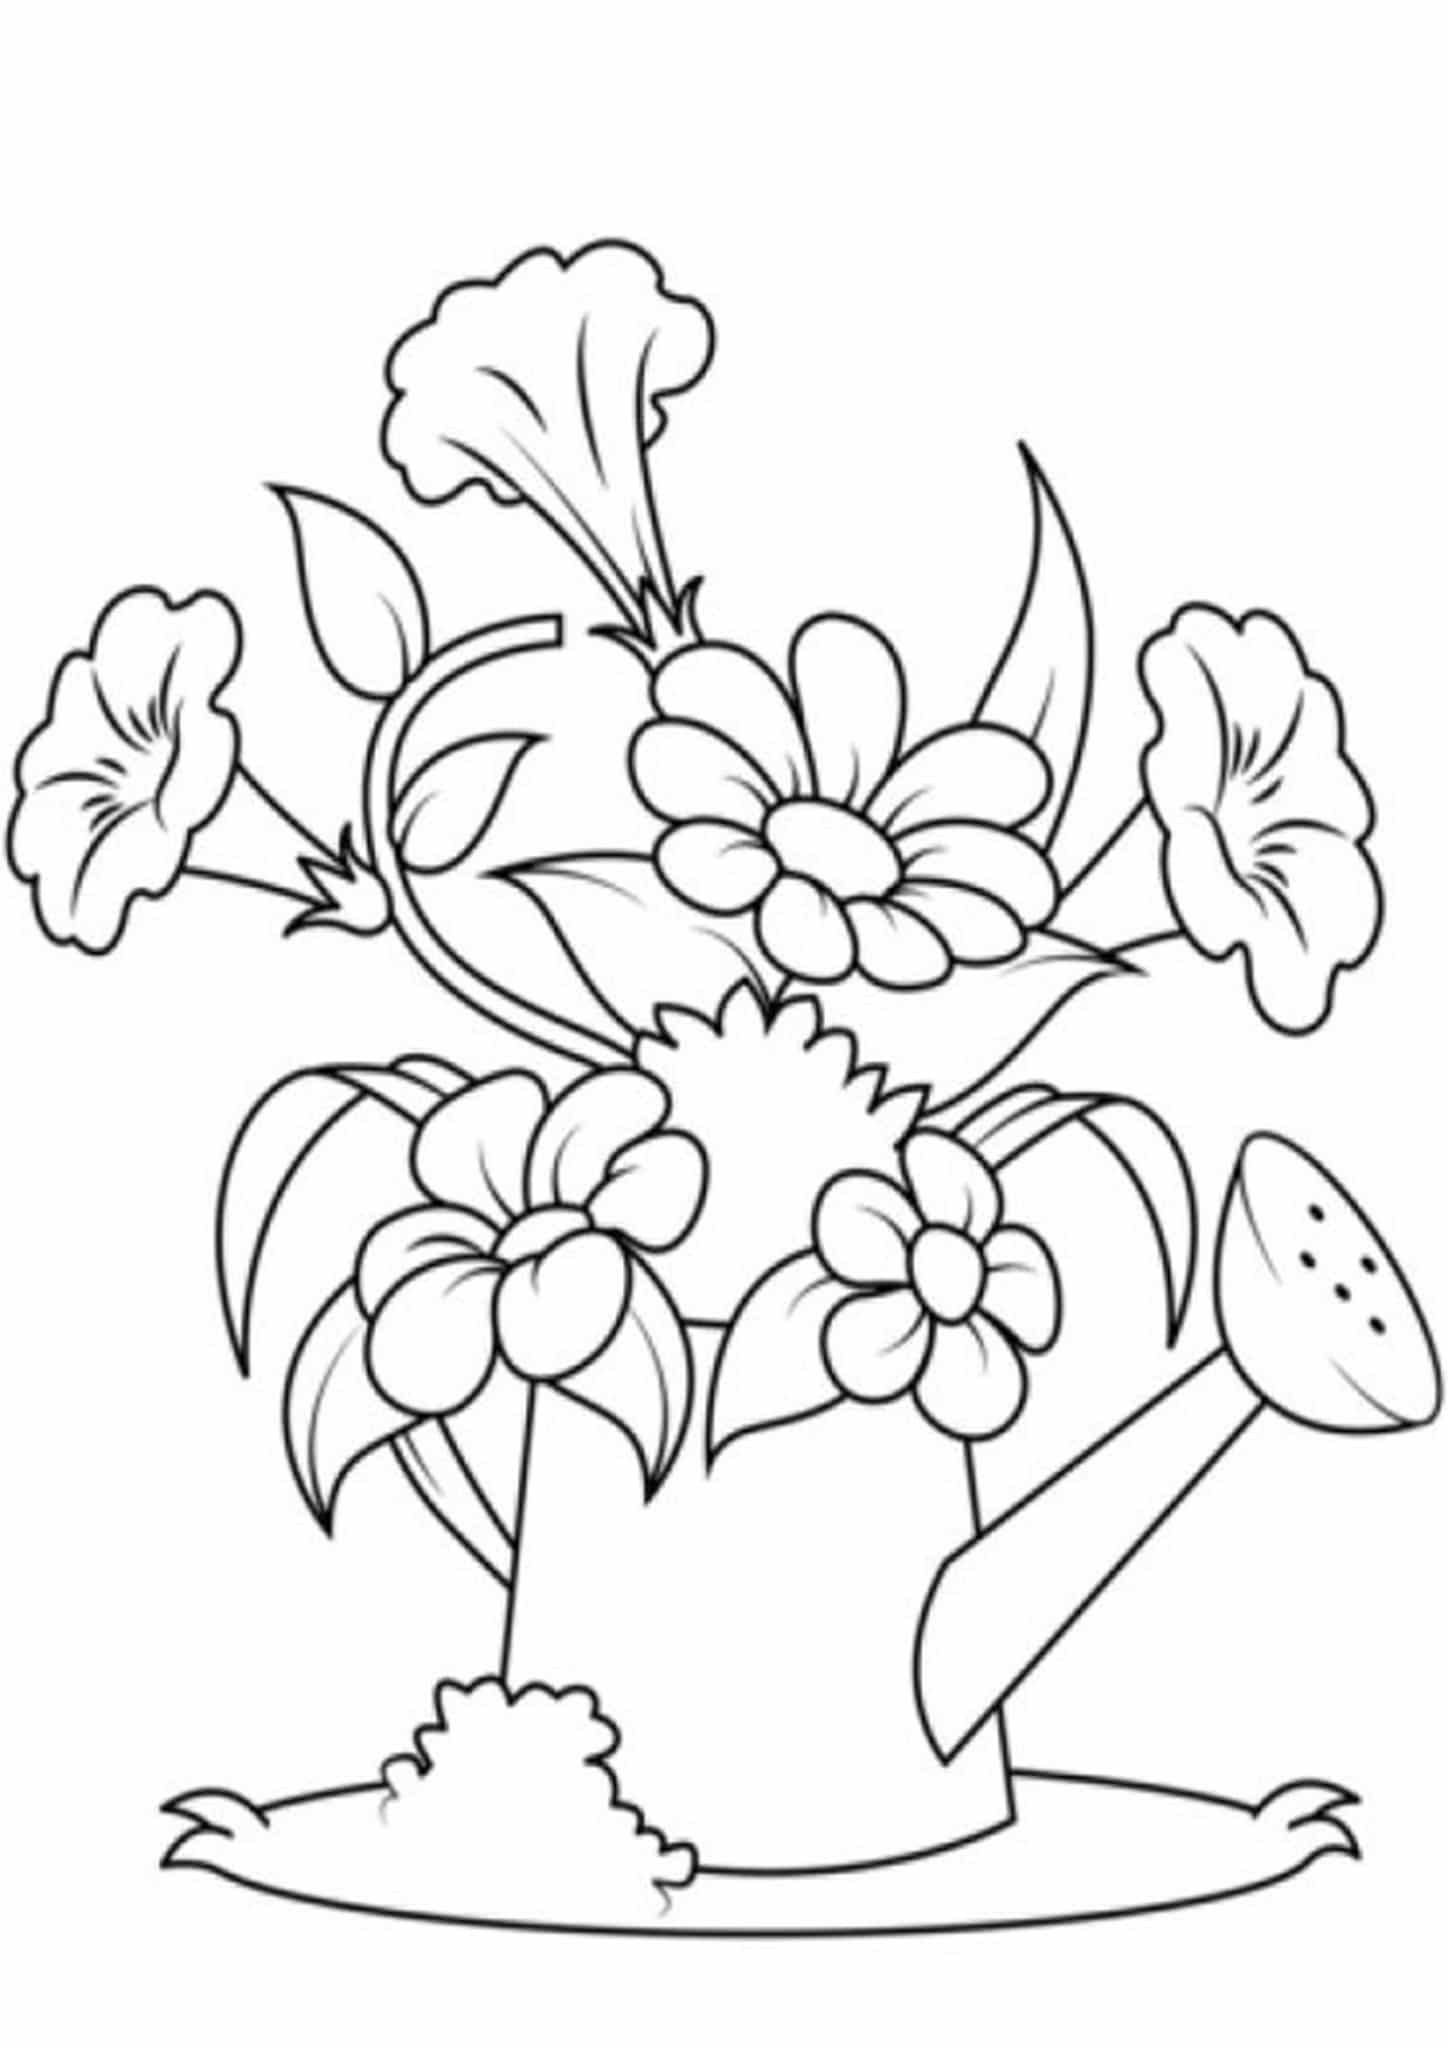 160+ Coloring Page Flowers: Blossom Your Imagination 51